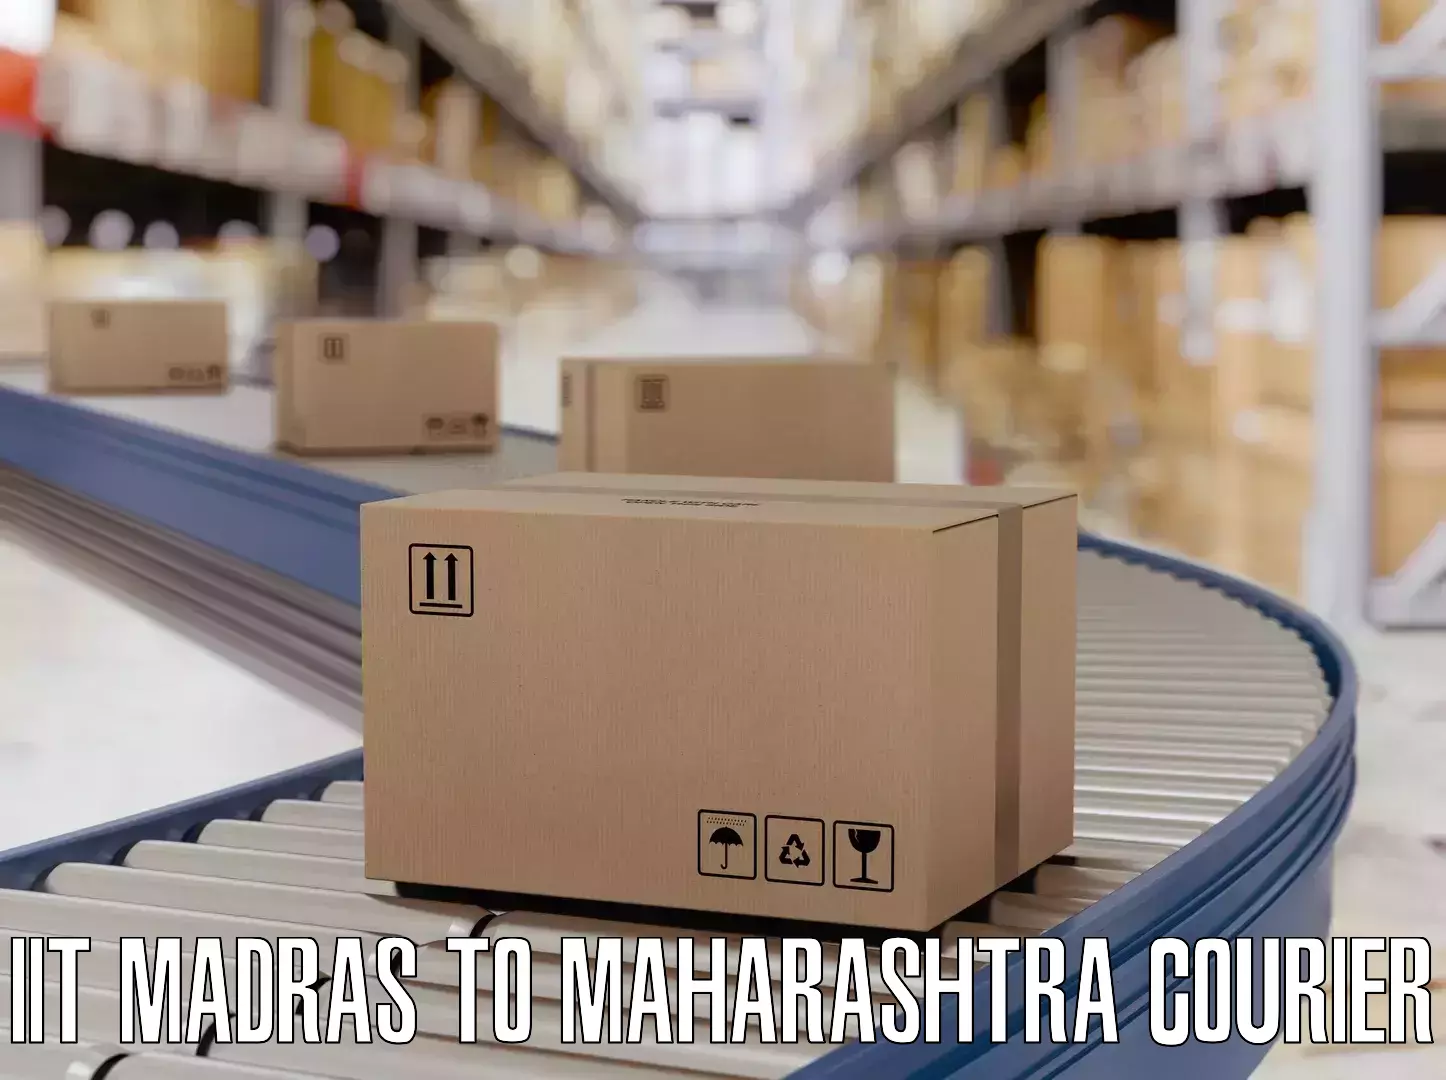 Luggage shipment specialists IIT Madras to Mudal